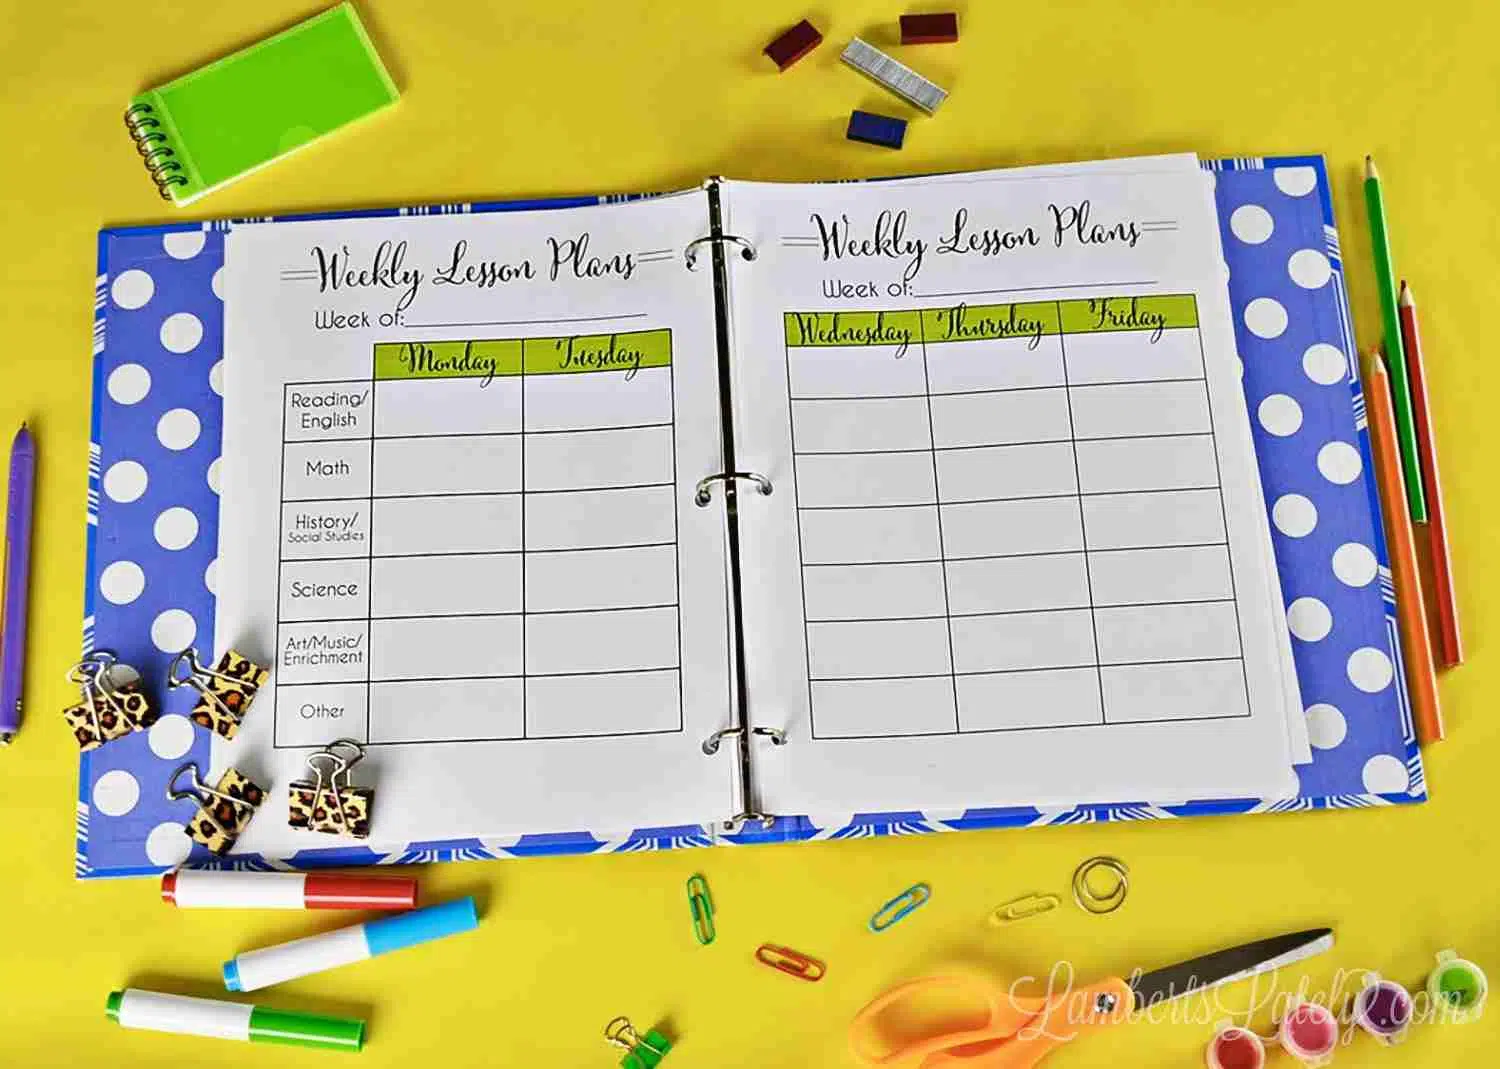 2 weekly lesson plan sheets in a notebook on a yellow desk